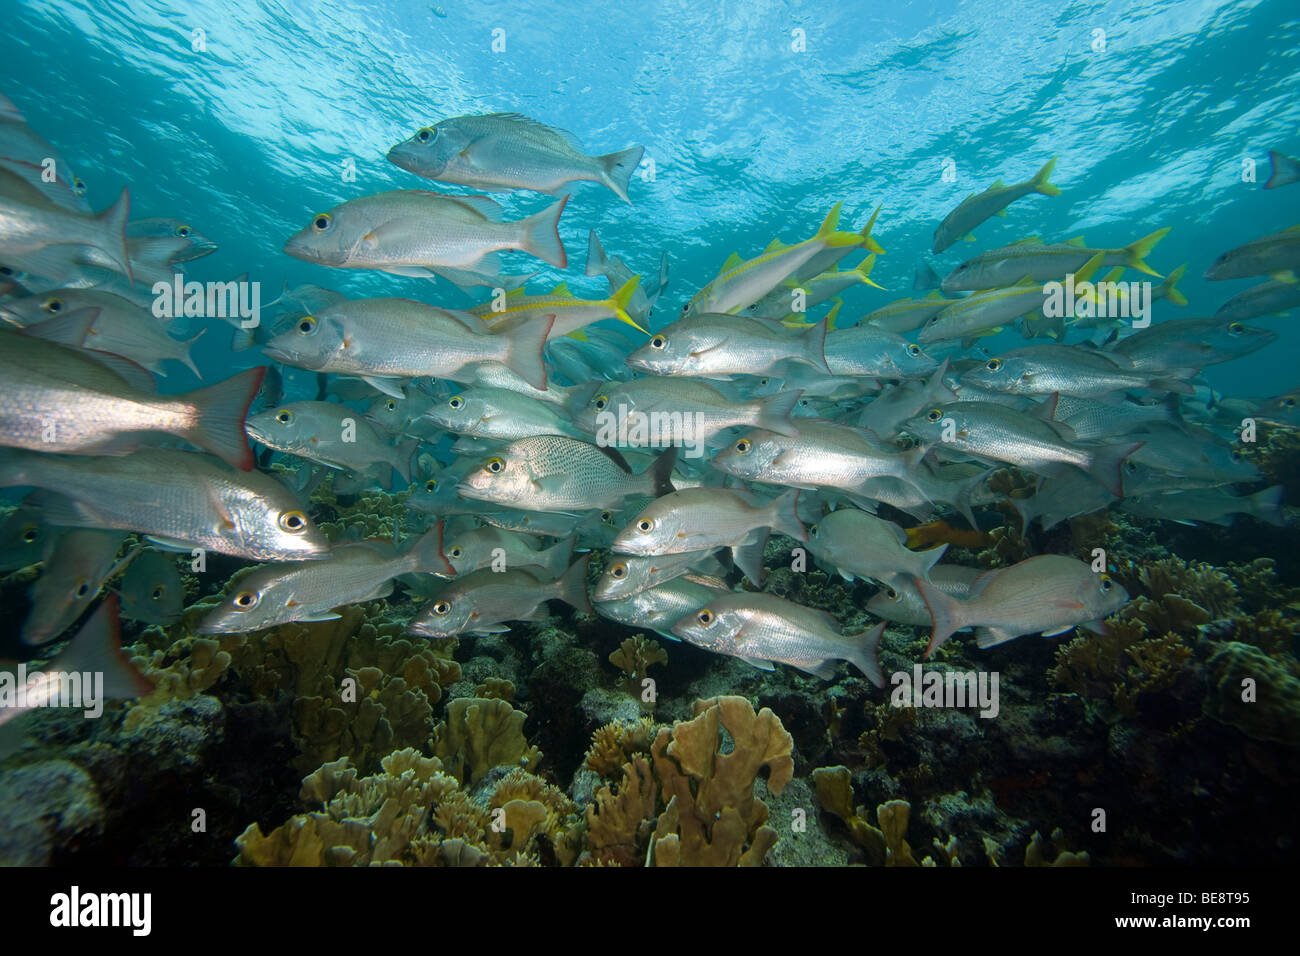 School of Mahogany Snapper (Lutjanus mahogoni) and Yellow Goatfish (Mulloidichthys martinicus) over a tropical corral reef. Stock Photo